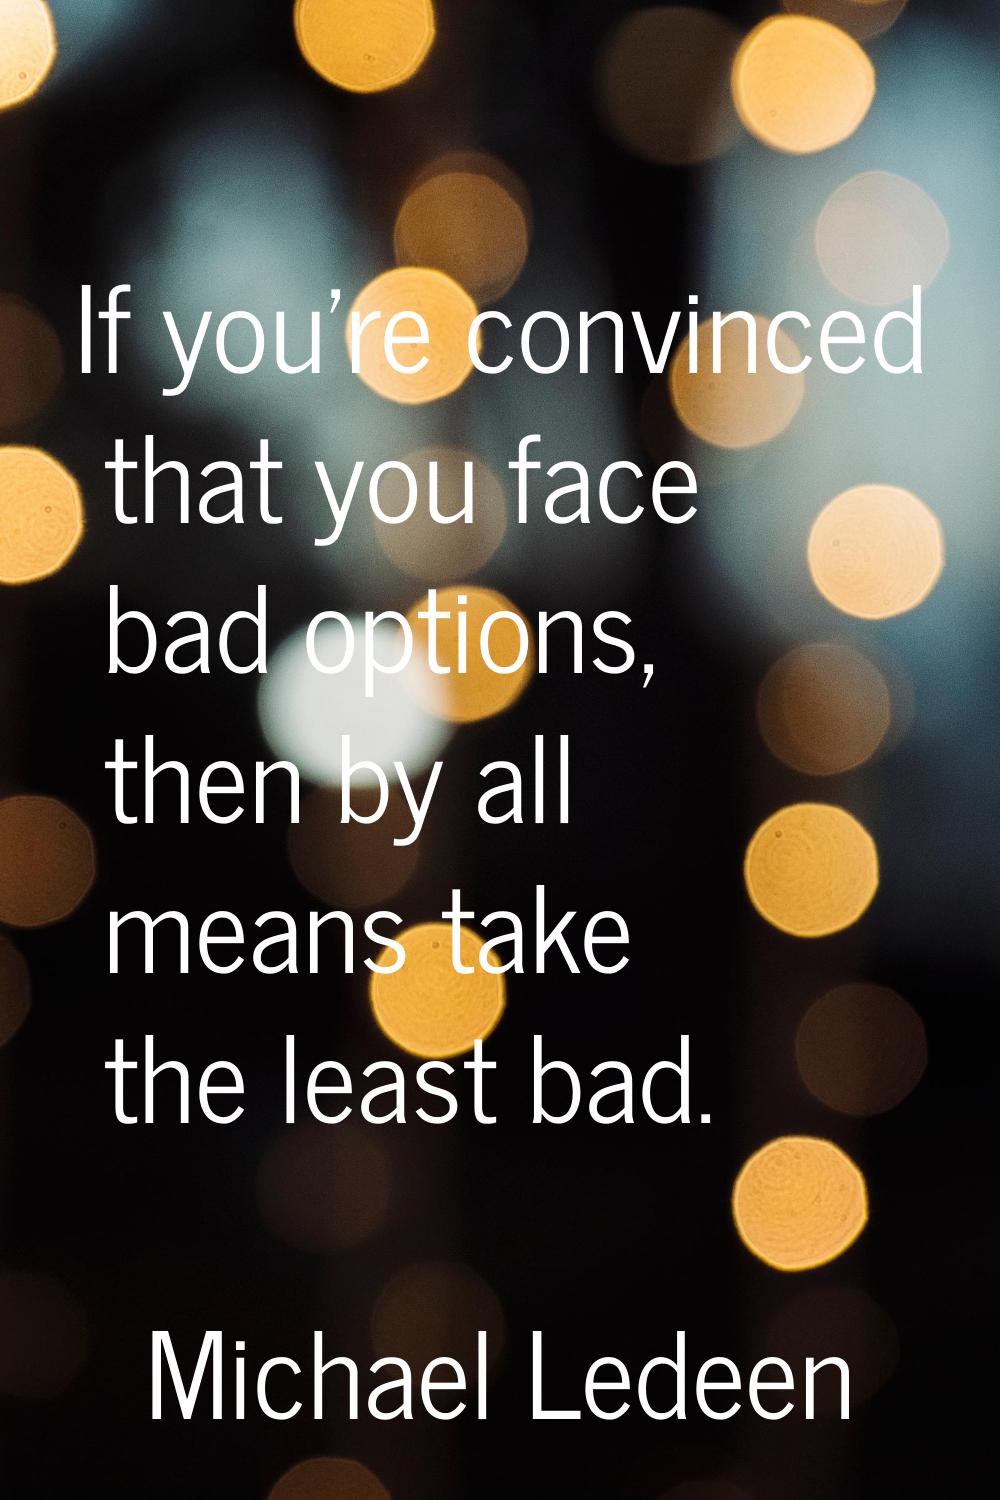 If you're convinced that you face bad options, then by all means take the least bad.